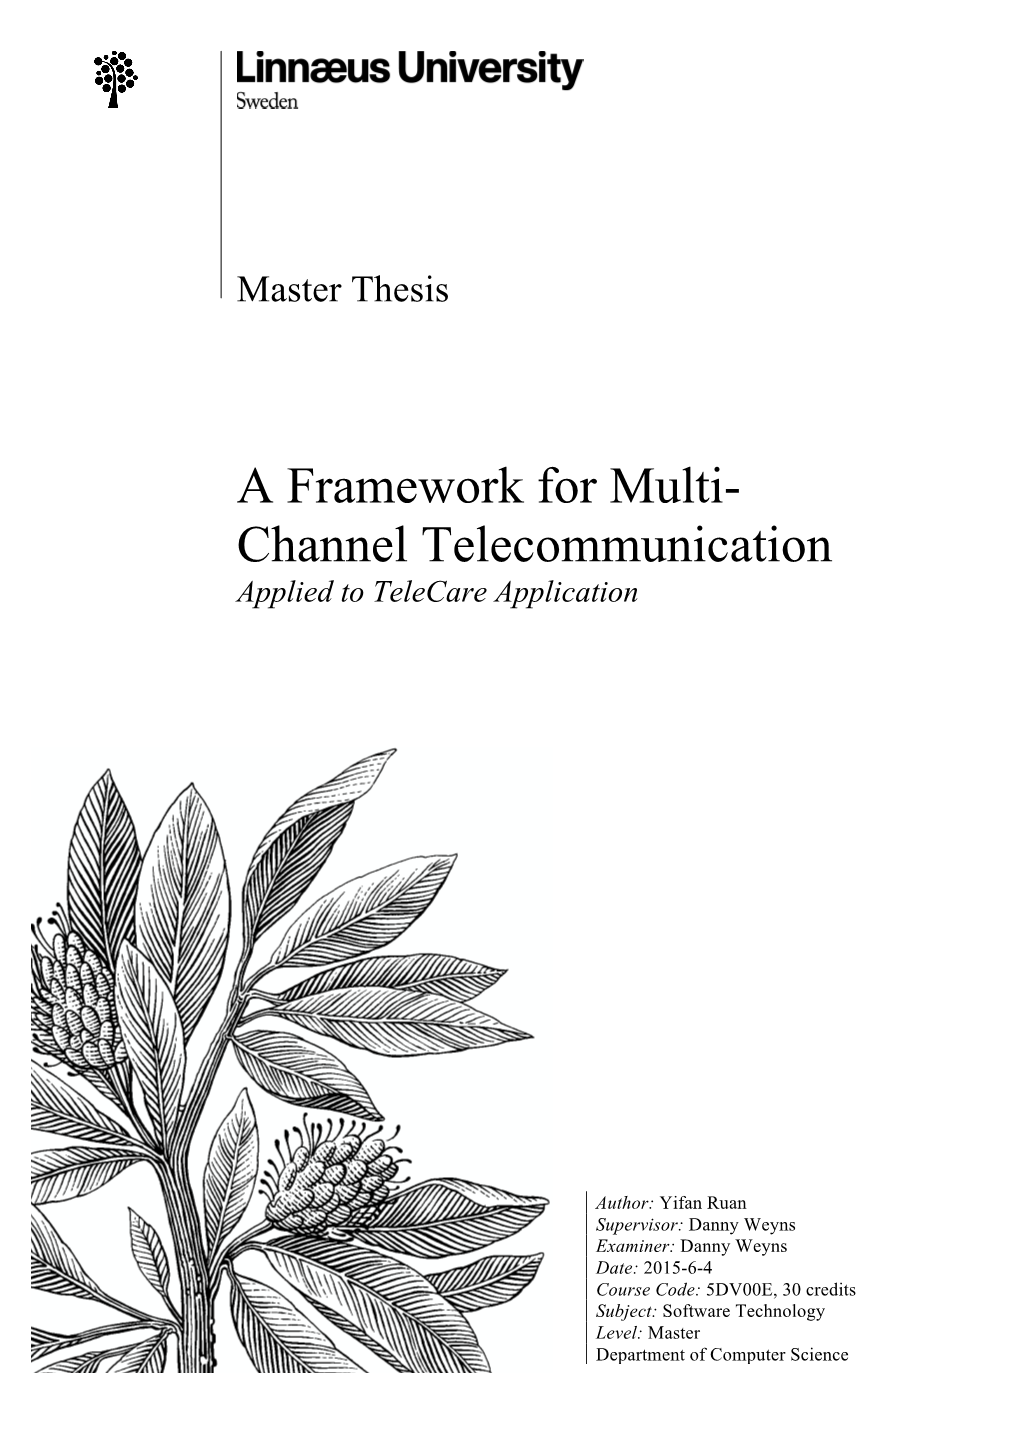 A Framework for Multi- Channel Telecommunication Applied to Telecare Application